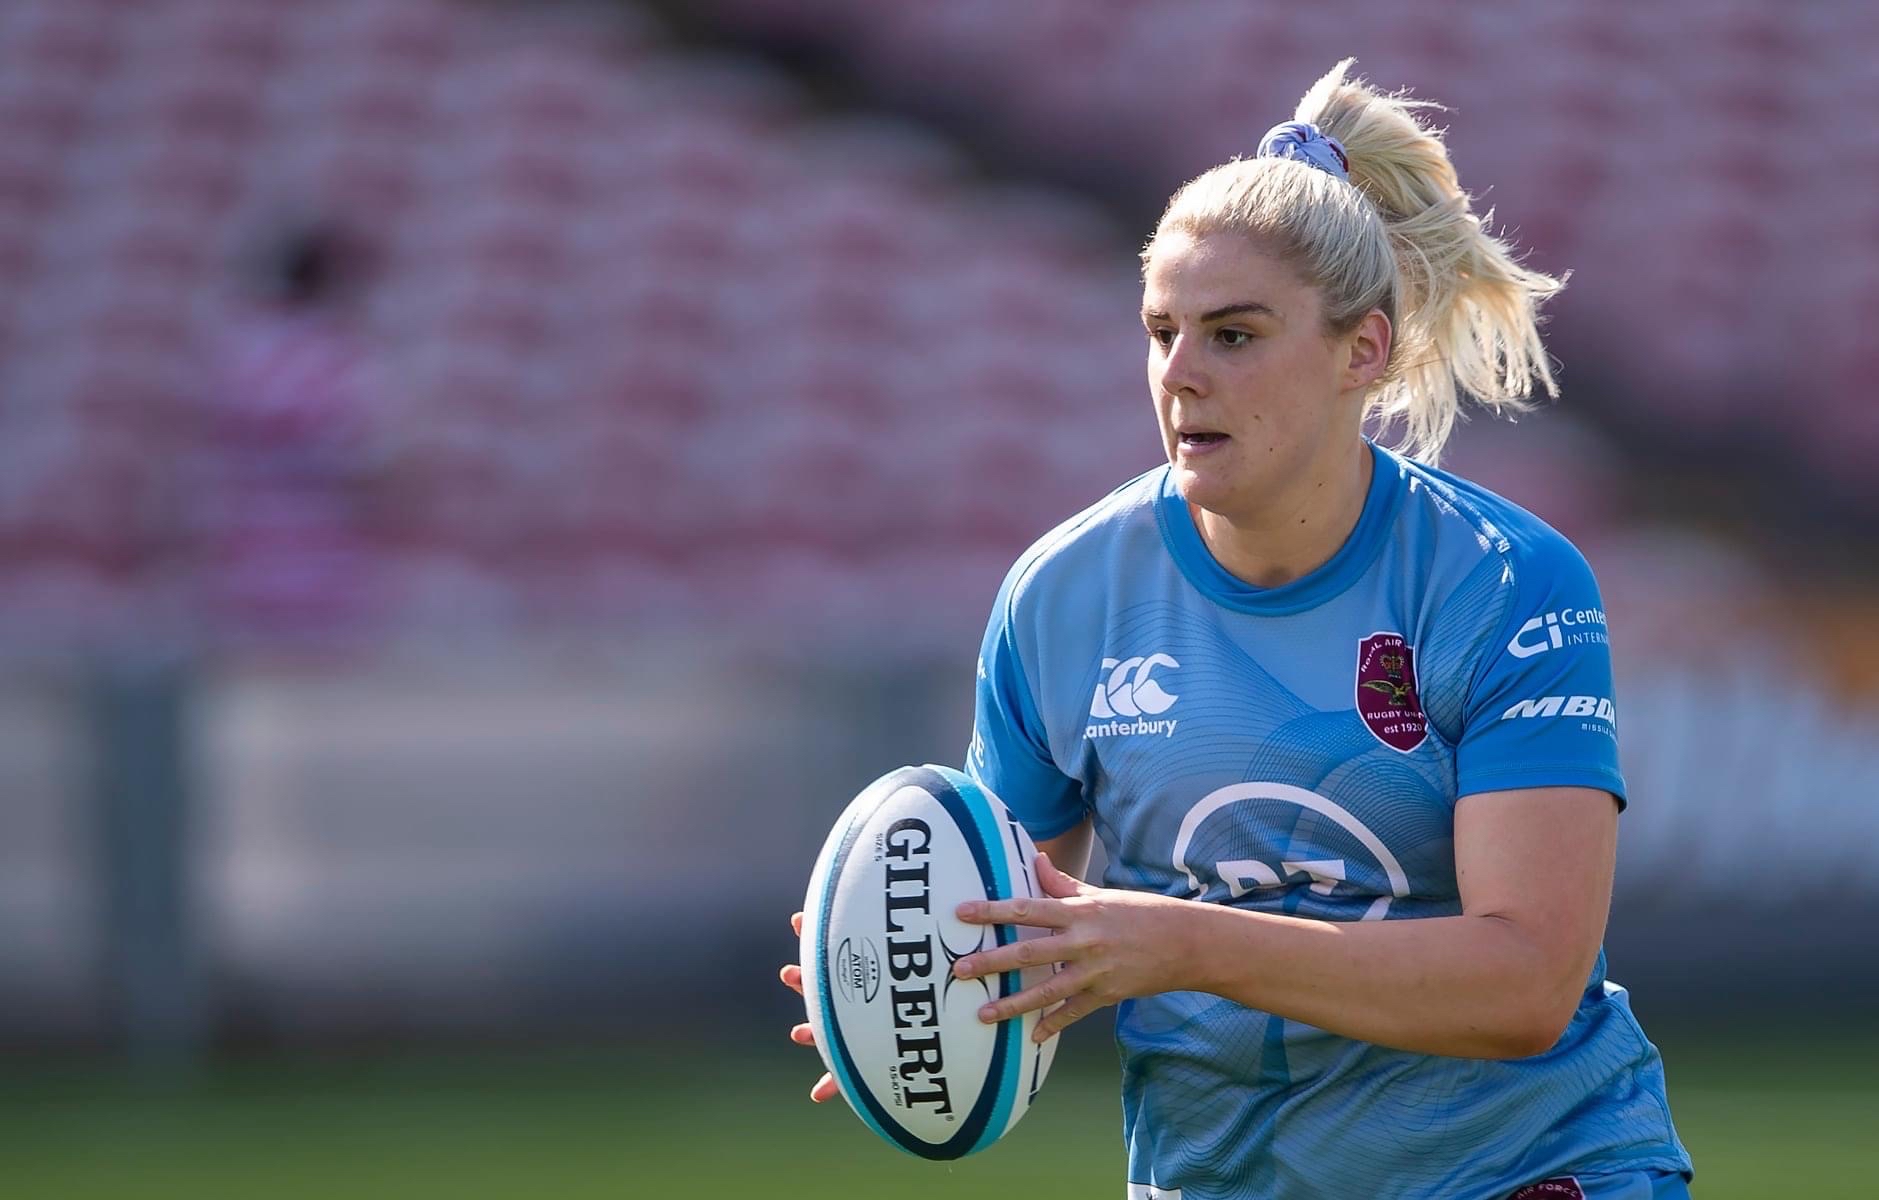 Image shows a female rugby player.